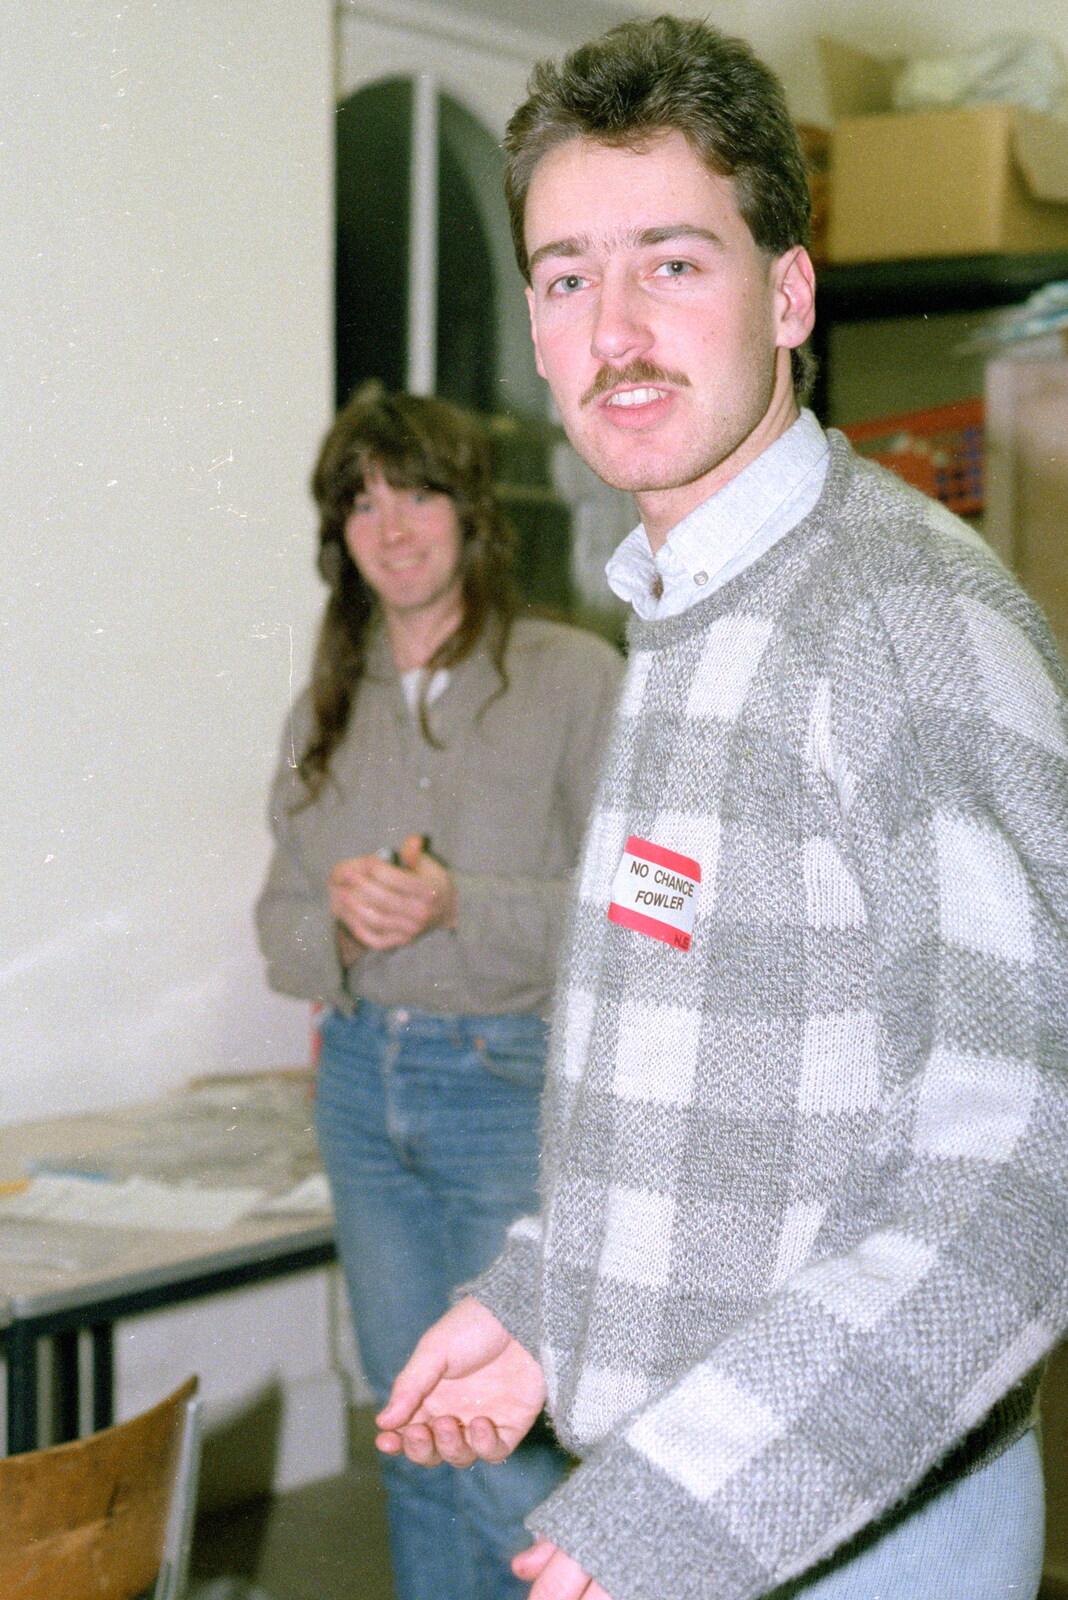 Mark Wilkins with a 'No chance, Fowler' sticker  from Uni: A Night In The Bank and Fly Magazine, Plymouth Polytechnic, Devon - March 10th 1986